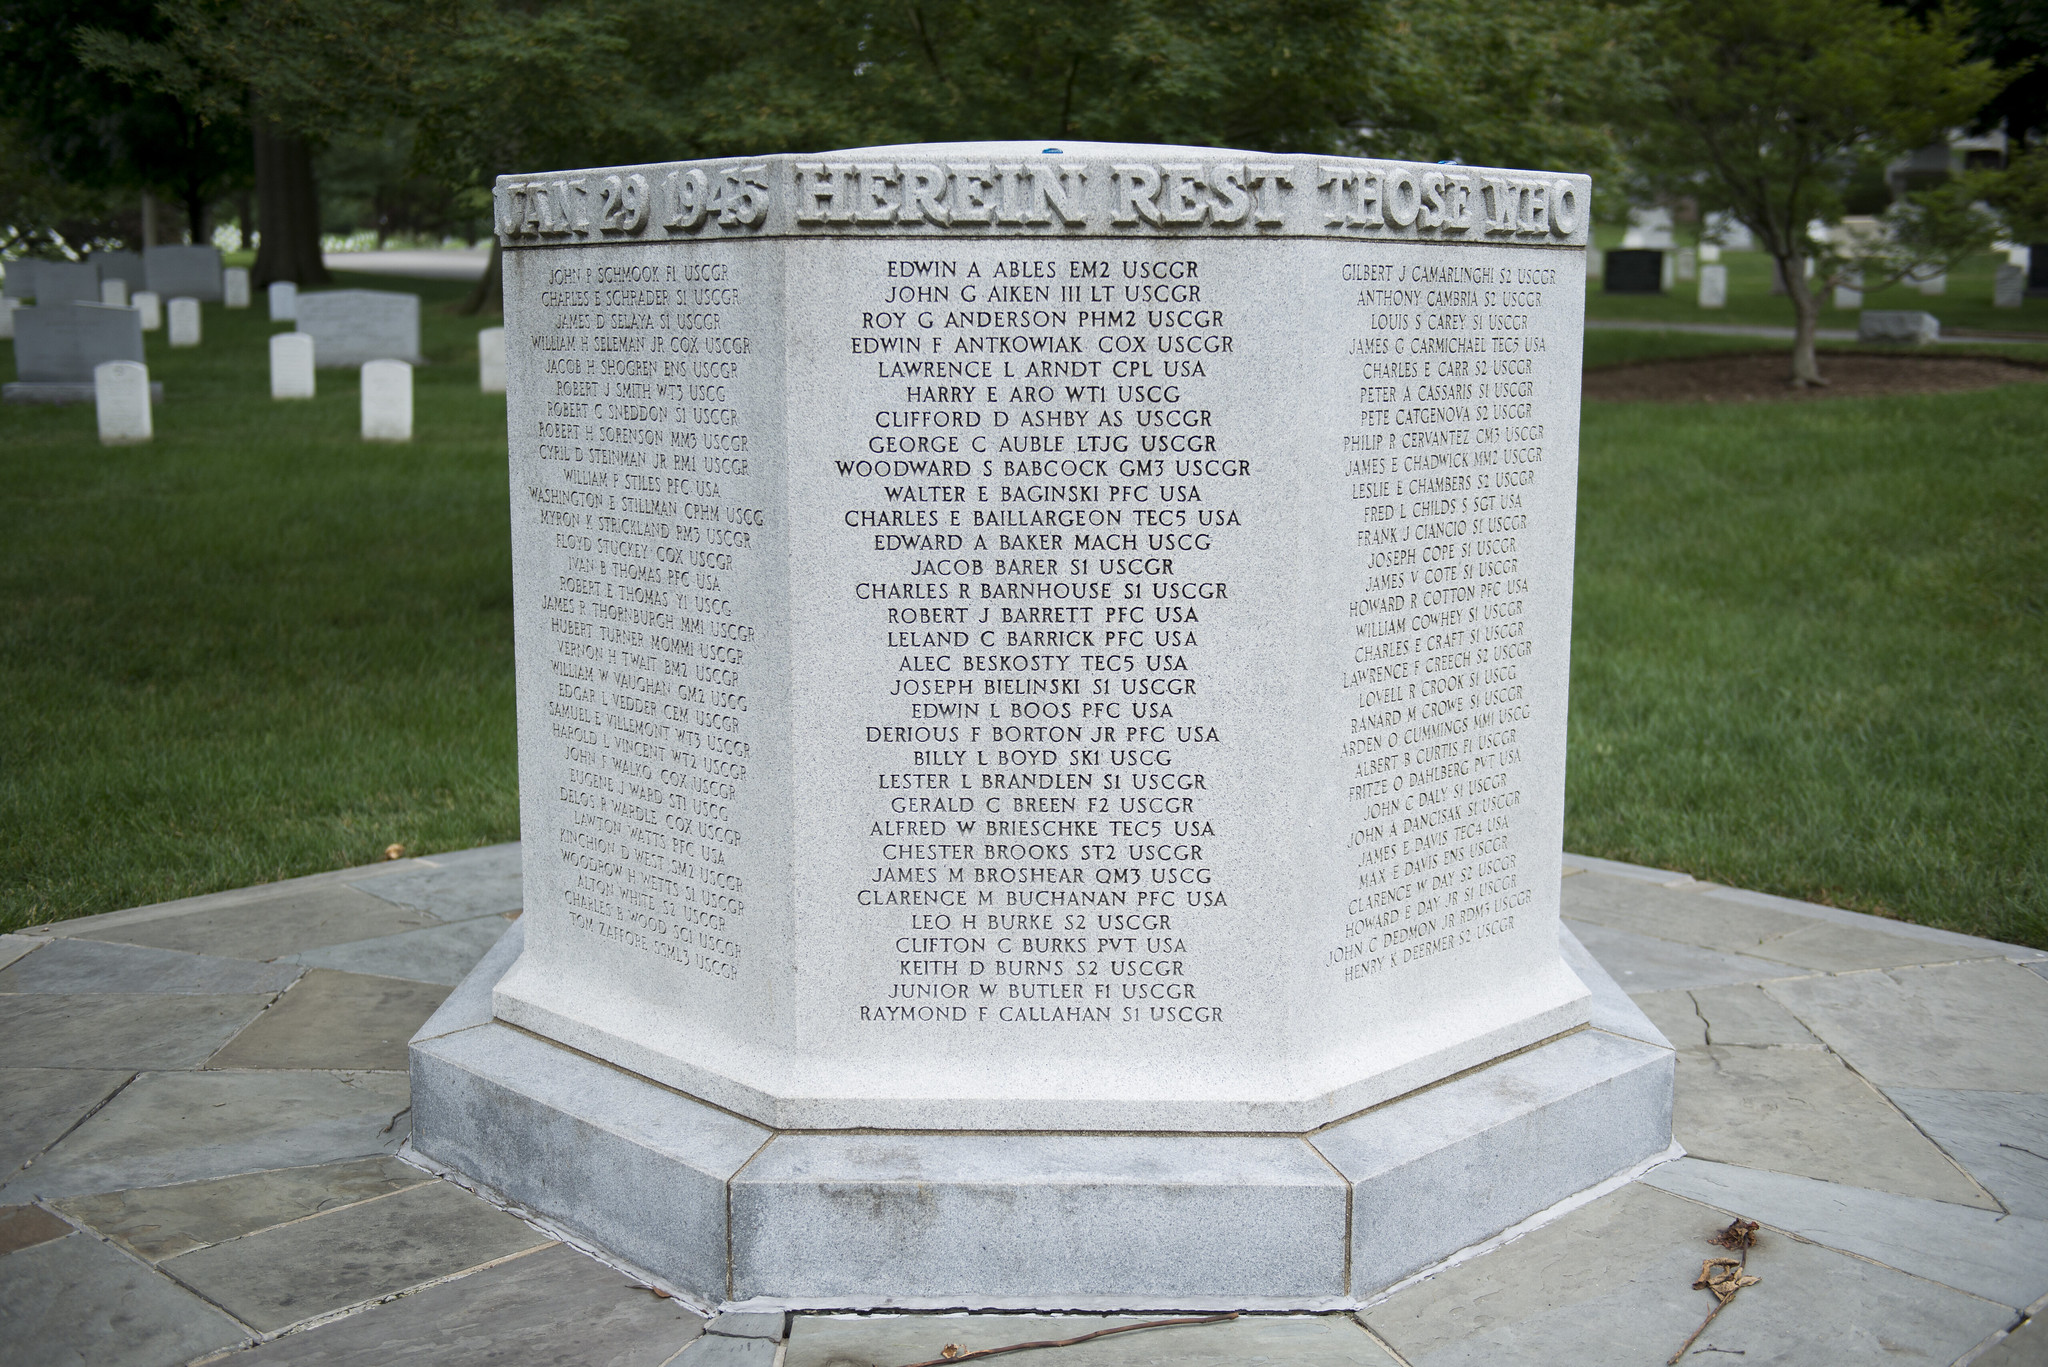 The USS Serpens Monument, an approximately four-foot-tall, octagonal granite marker inscribed with names of the 250 victims of the 1945 Coast Guard disaster